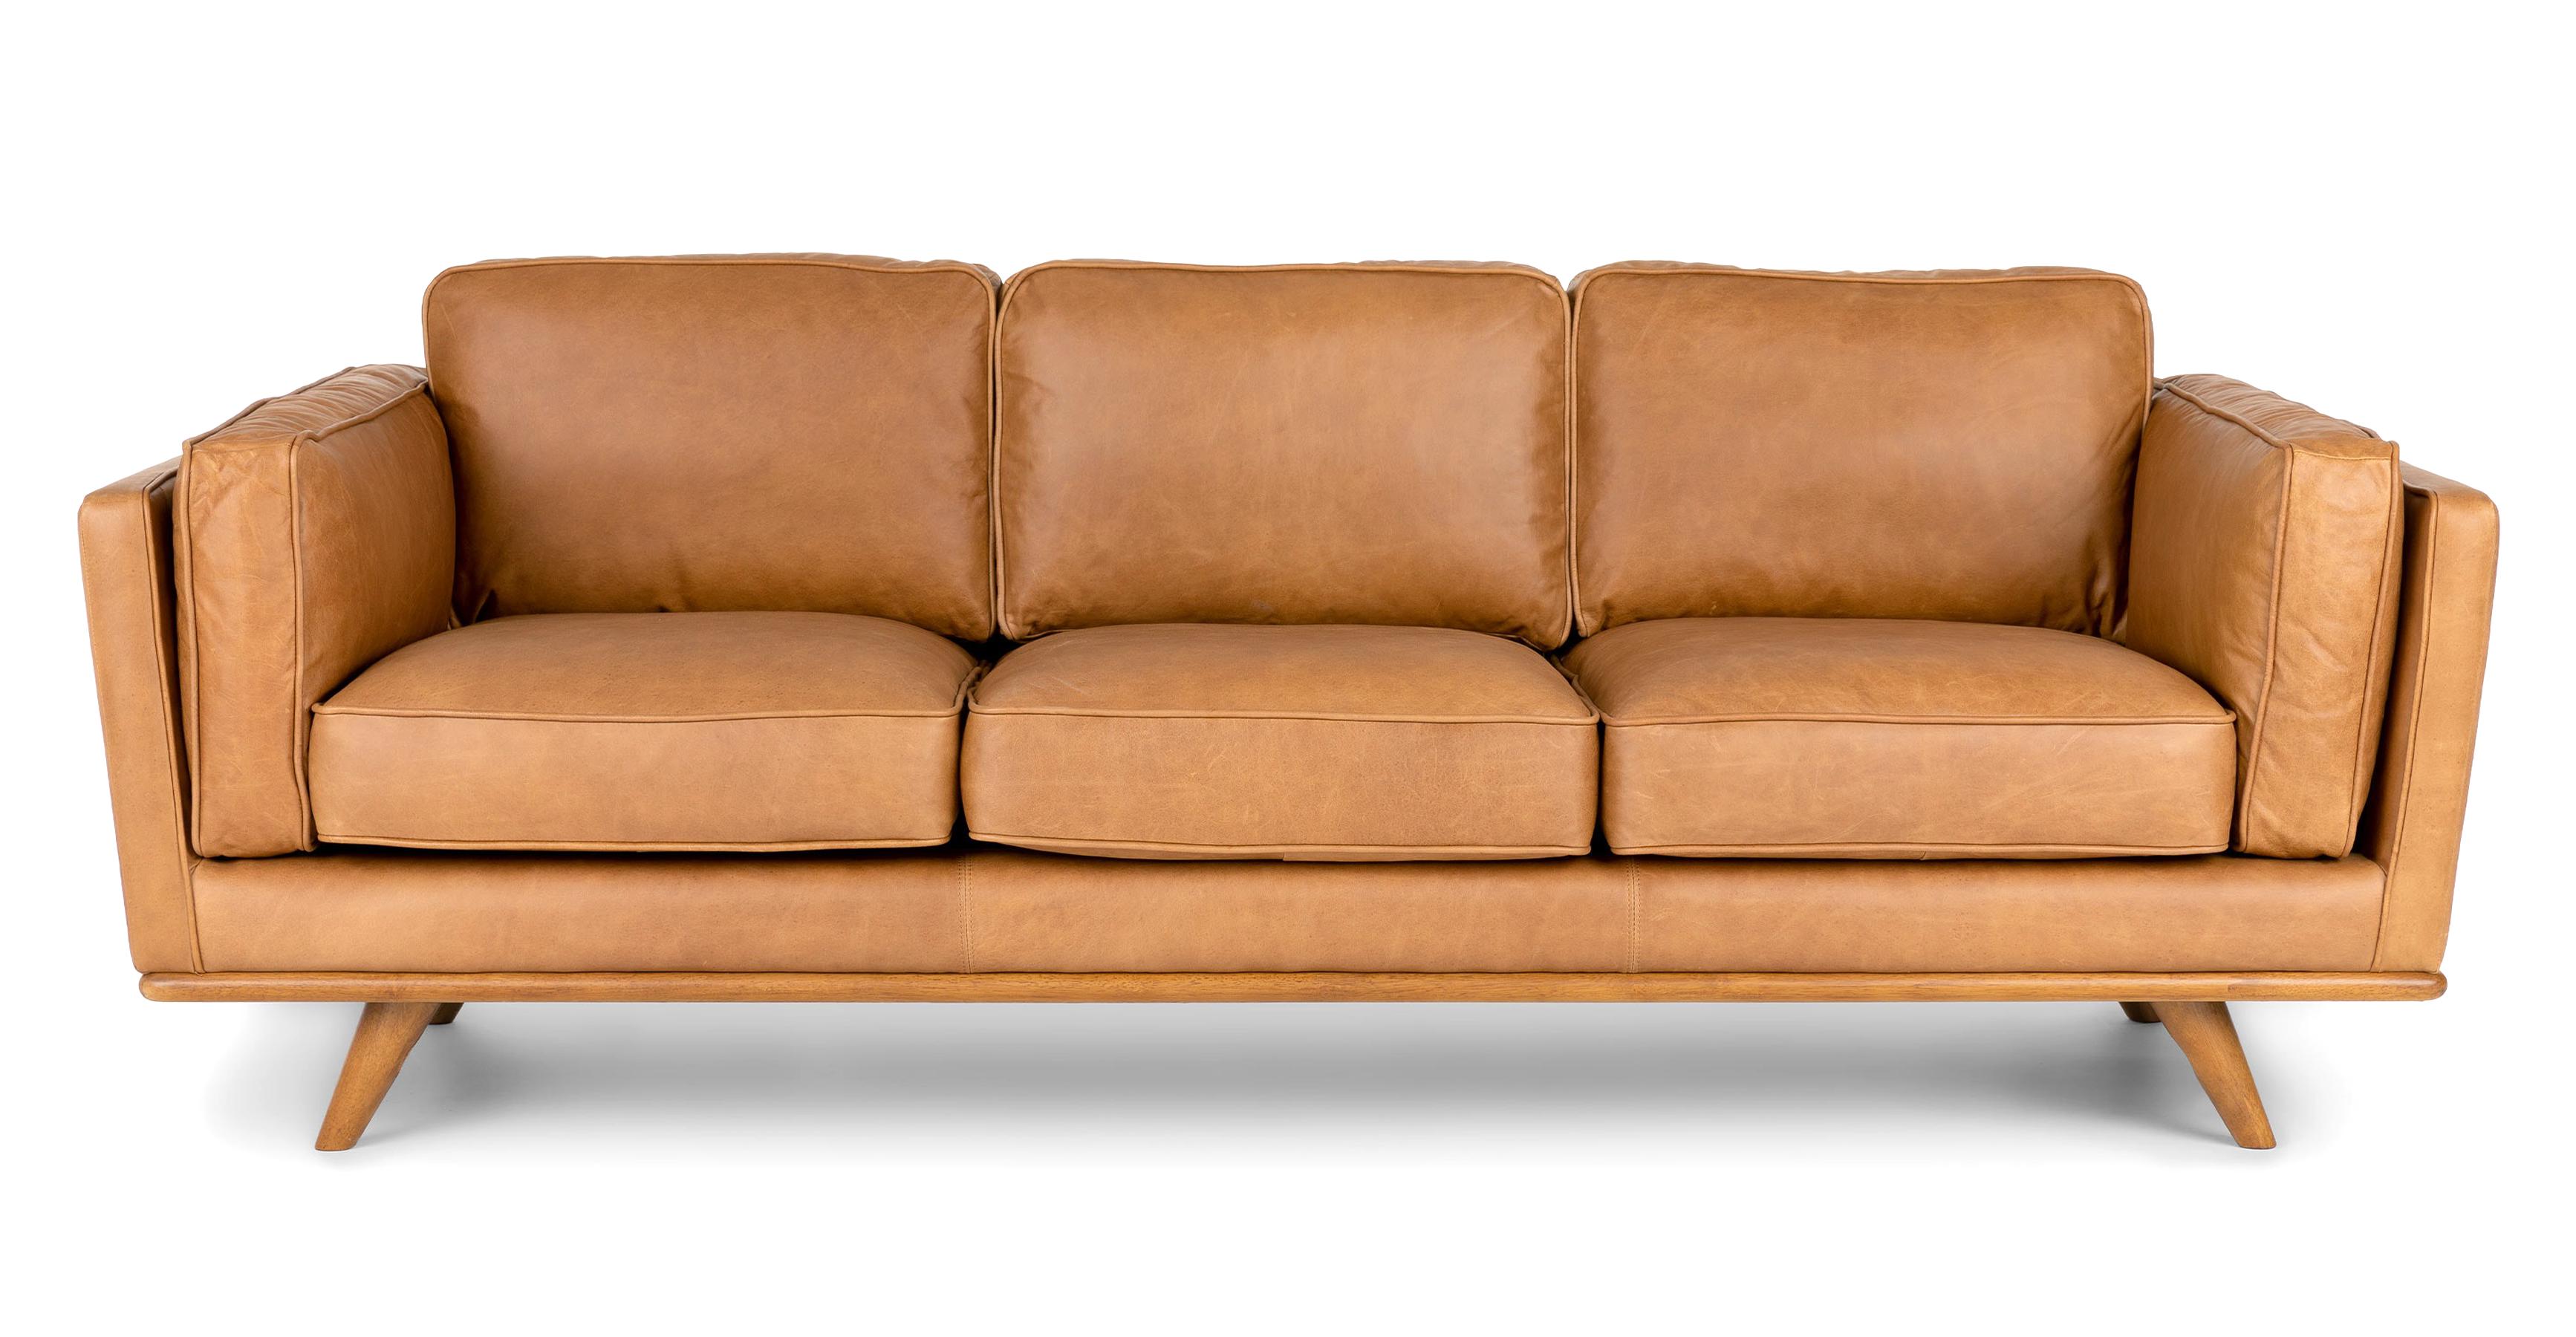 tan leather sofa with legs